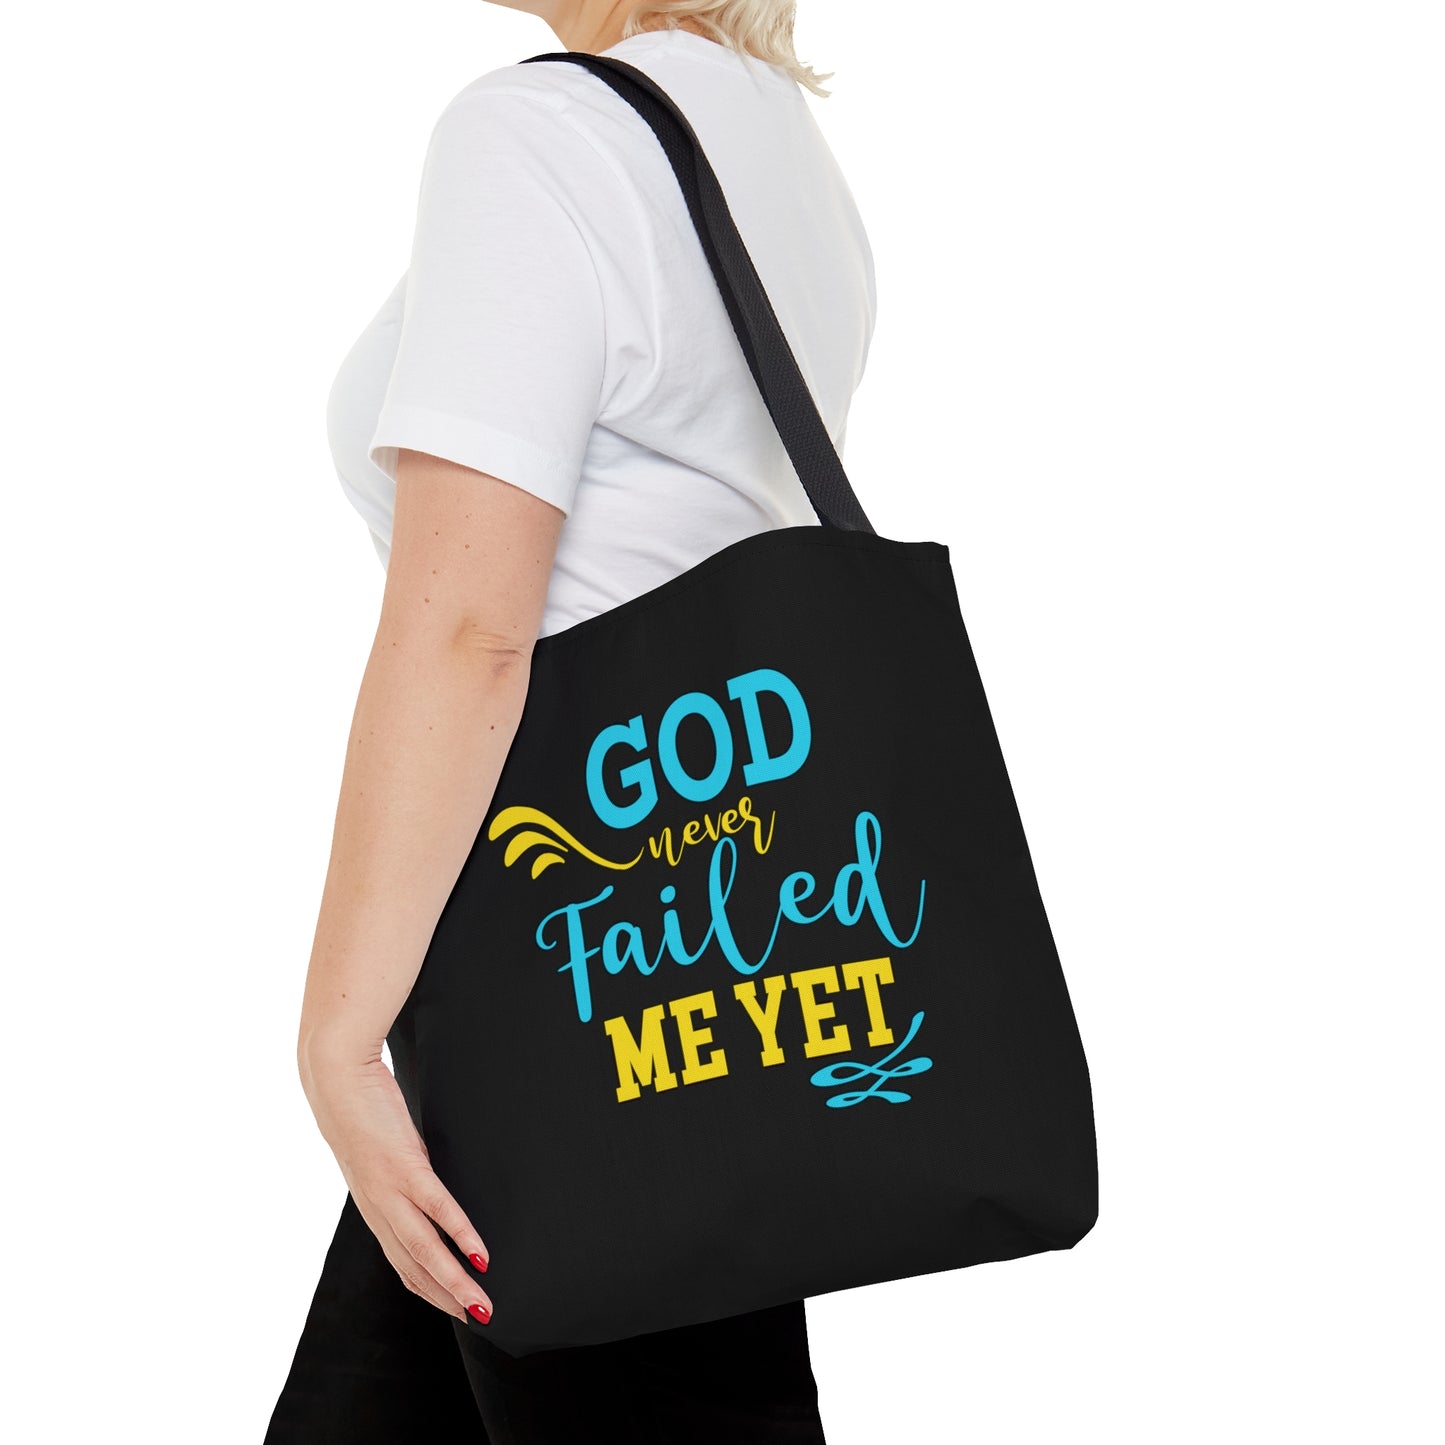 God Never Failed Me Yet Tote Bag